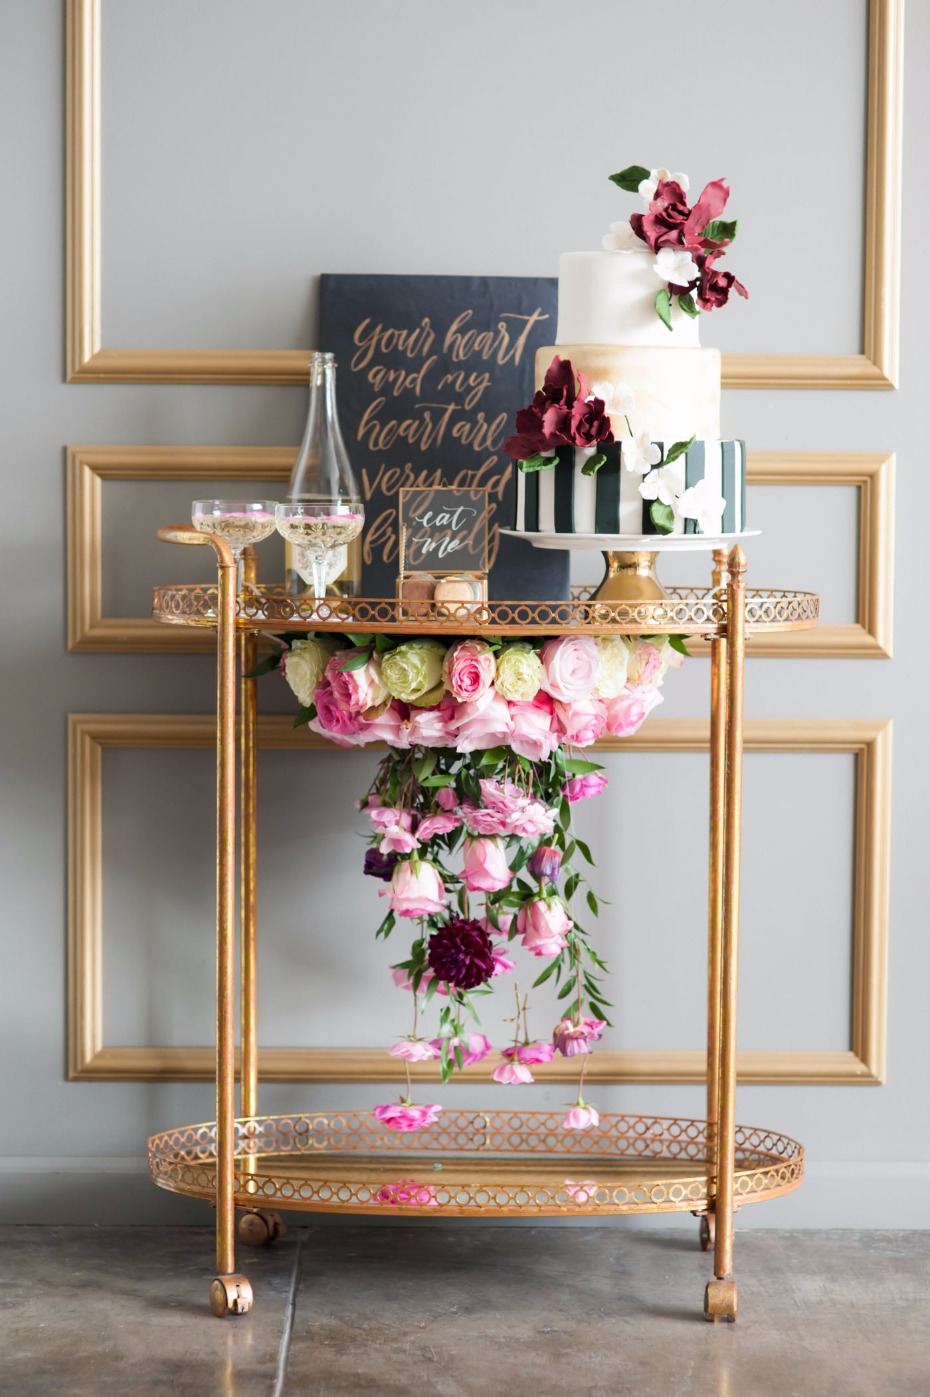 CAKE bar cart with a floral chandelier!